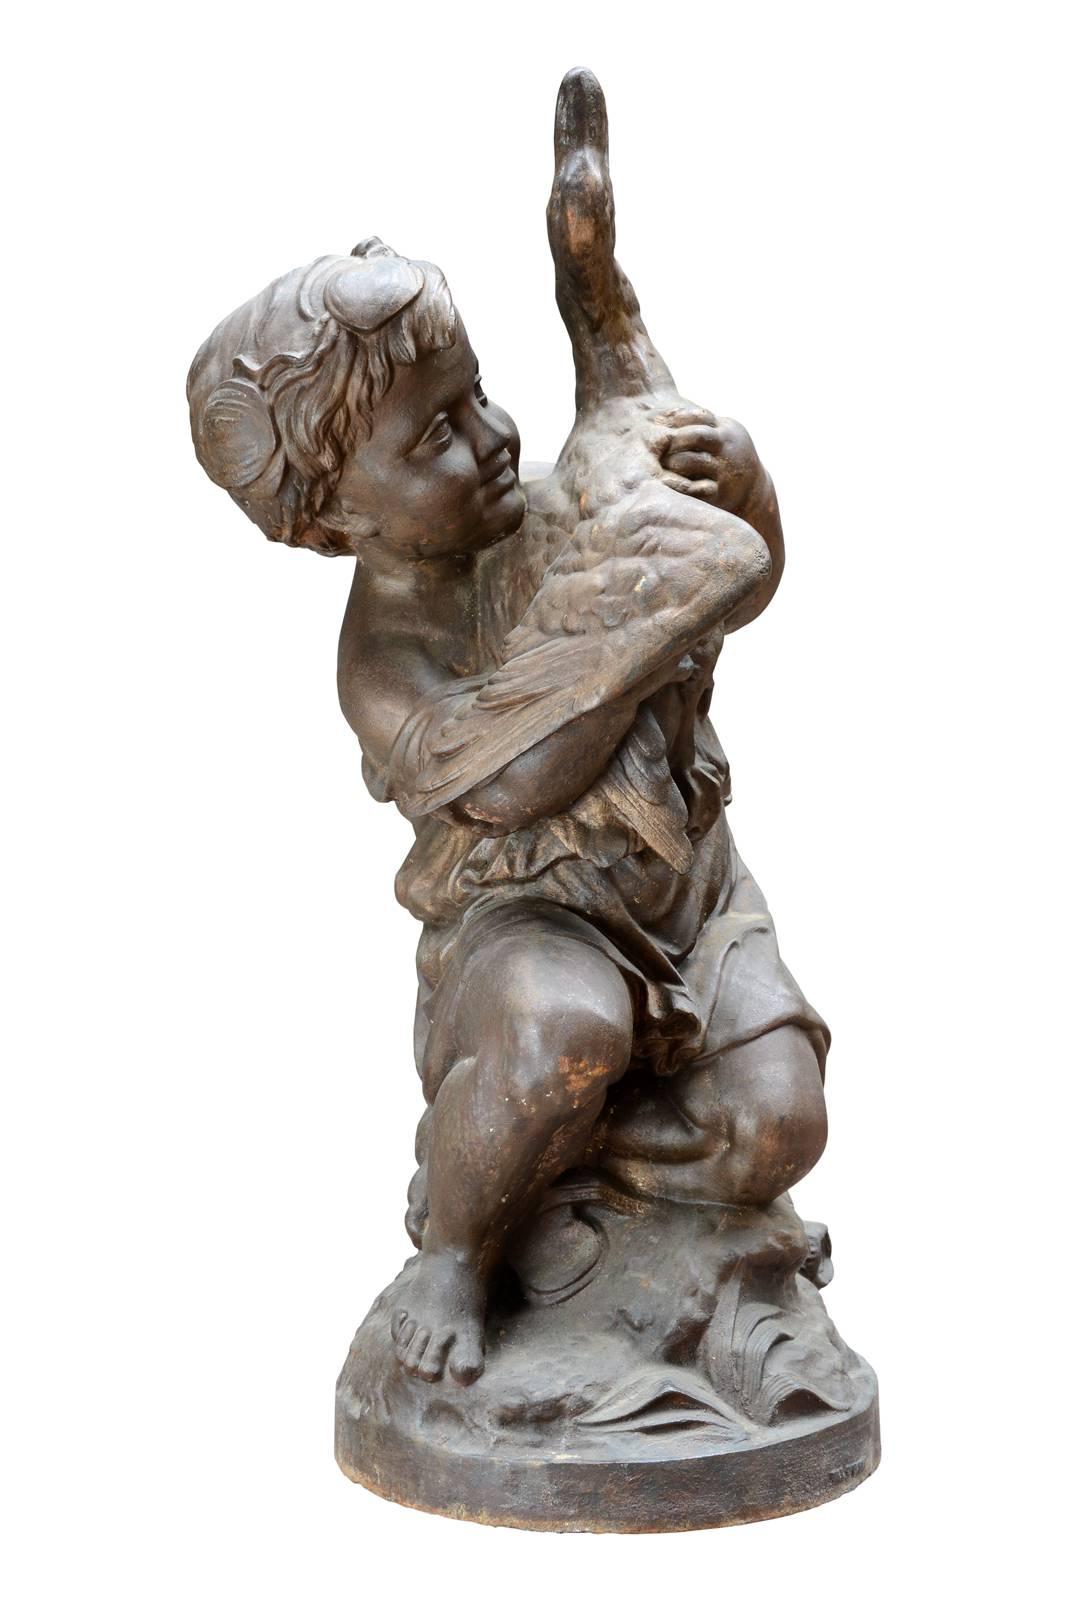 Dated from the 19th century, cast iron statue of the child and the duck after Mathurin Moreau (1822-1912) by the foundry of Val d'Osne. The statue represents a child kneeling in the middle of ferns enclosing a duck. The joyful expression of the boy